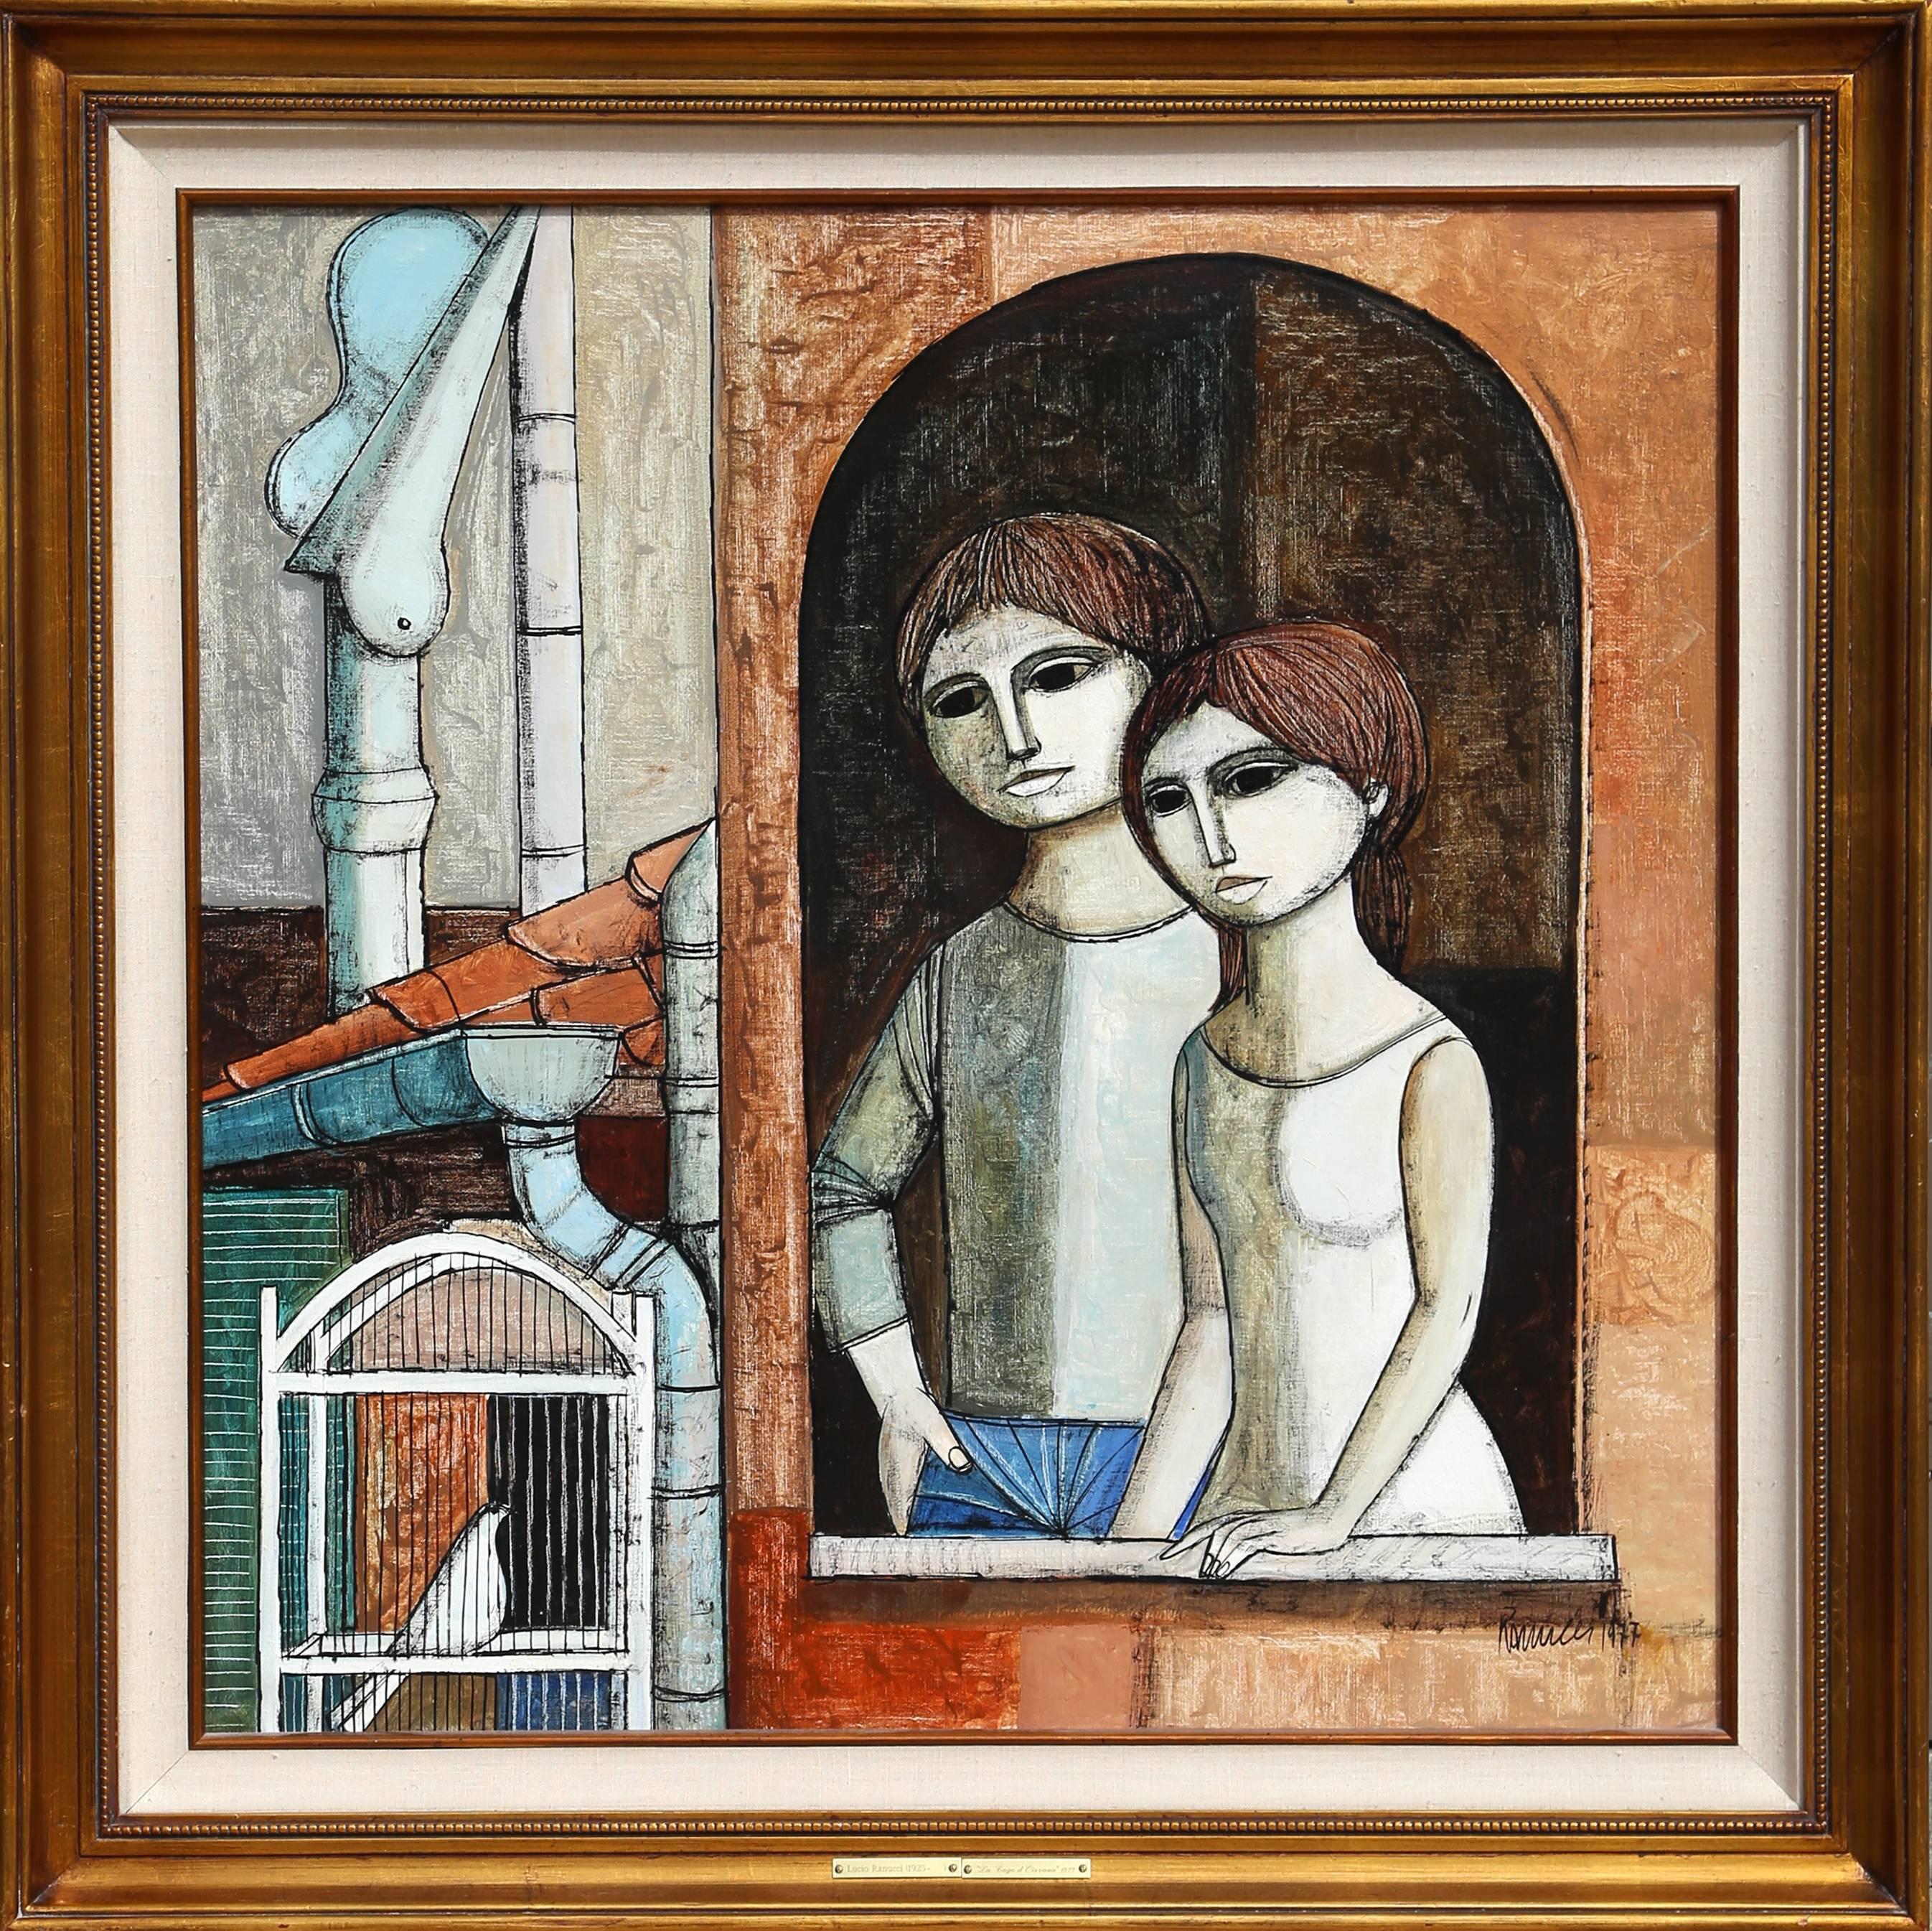 Artist: Lucio Ranucci, Italian (1925 - )
Title: Birdcage
Year: 1977
Medium: Oil on Canvas, signed l.r.
Size: 30 in. x 30 in. (76.2 cm x 76.2 cm)
Frame Size: 37.5 x 37.5 inches